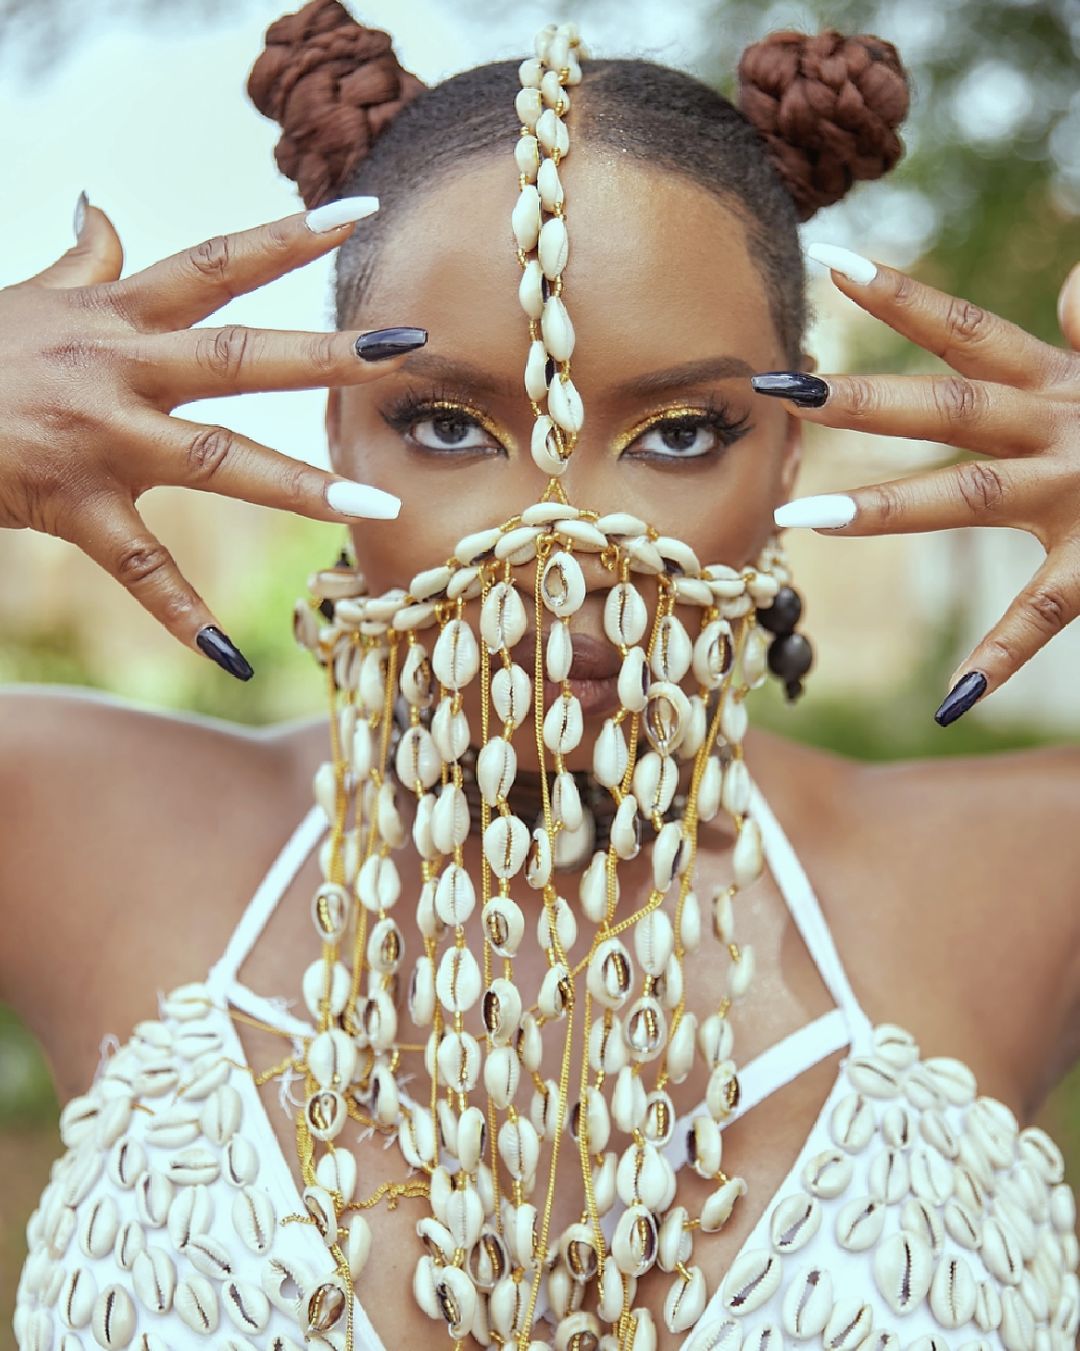 Yemi Alade Unleashes Visuals For Groovy Tune, ‘Dancina’ (Watch)